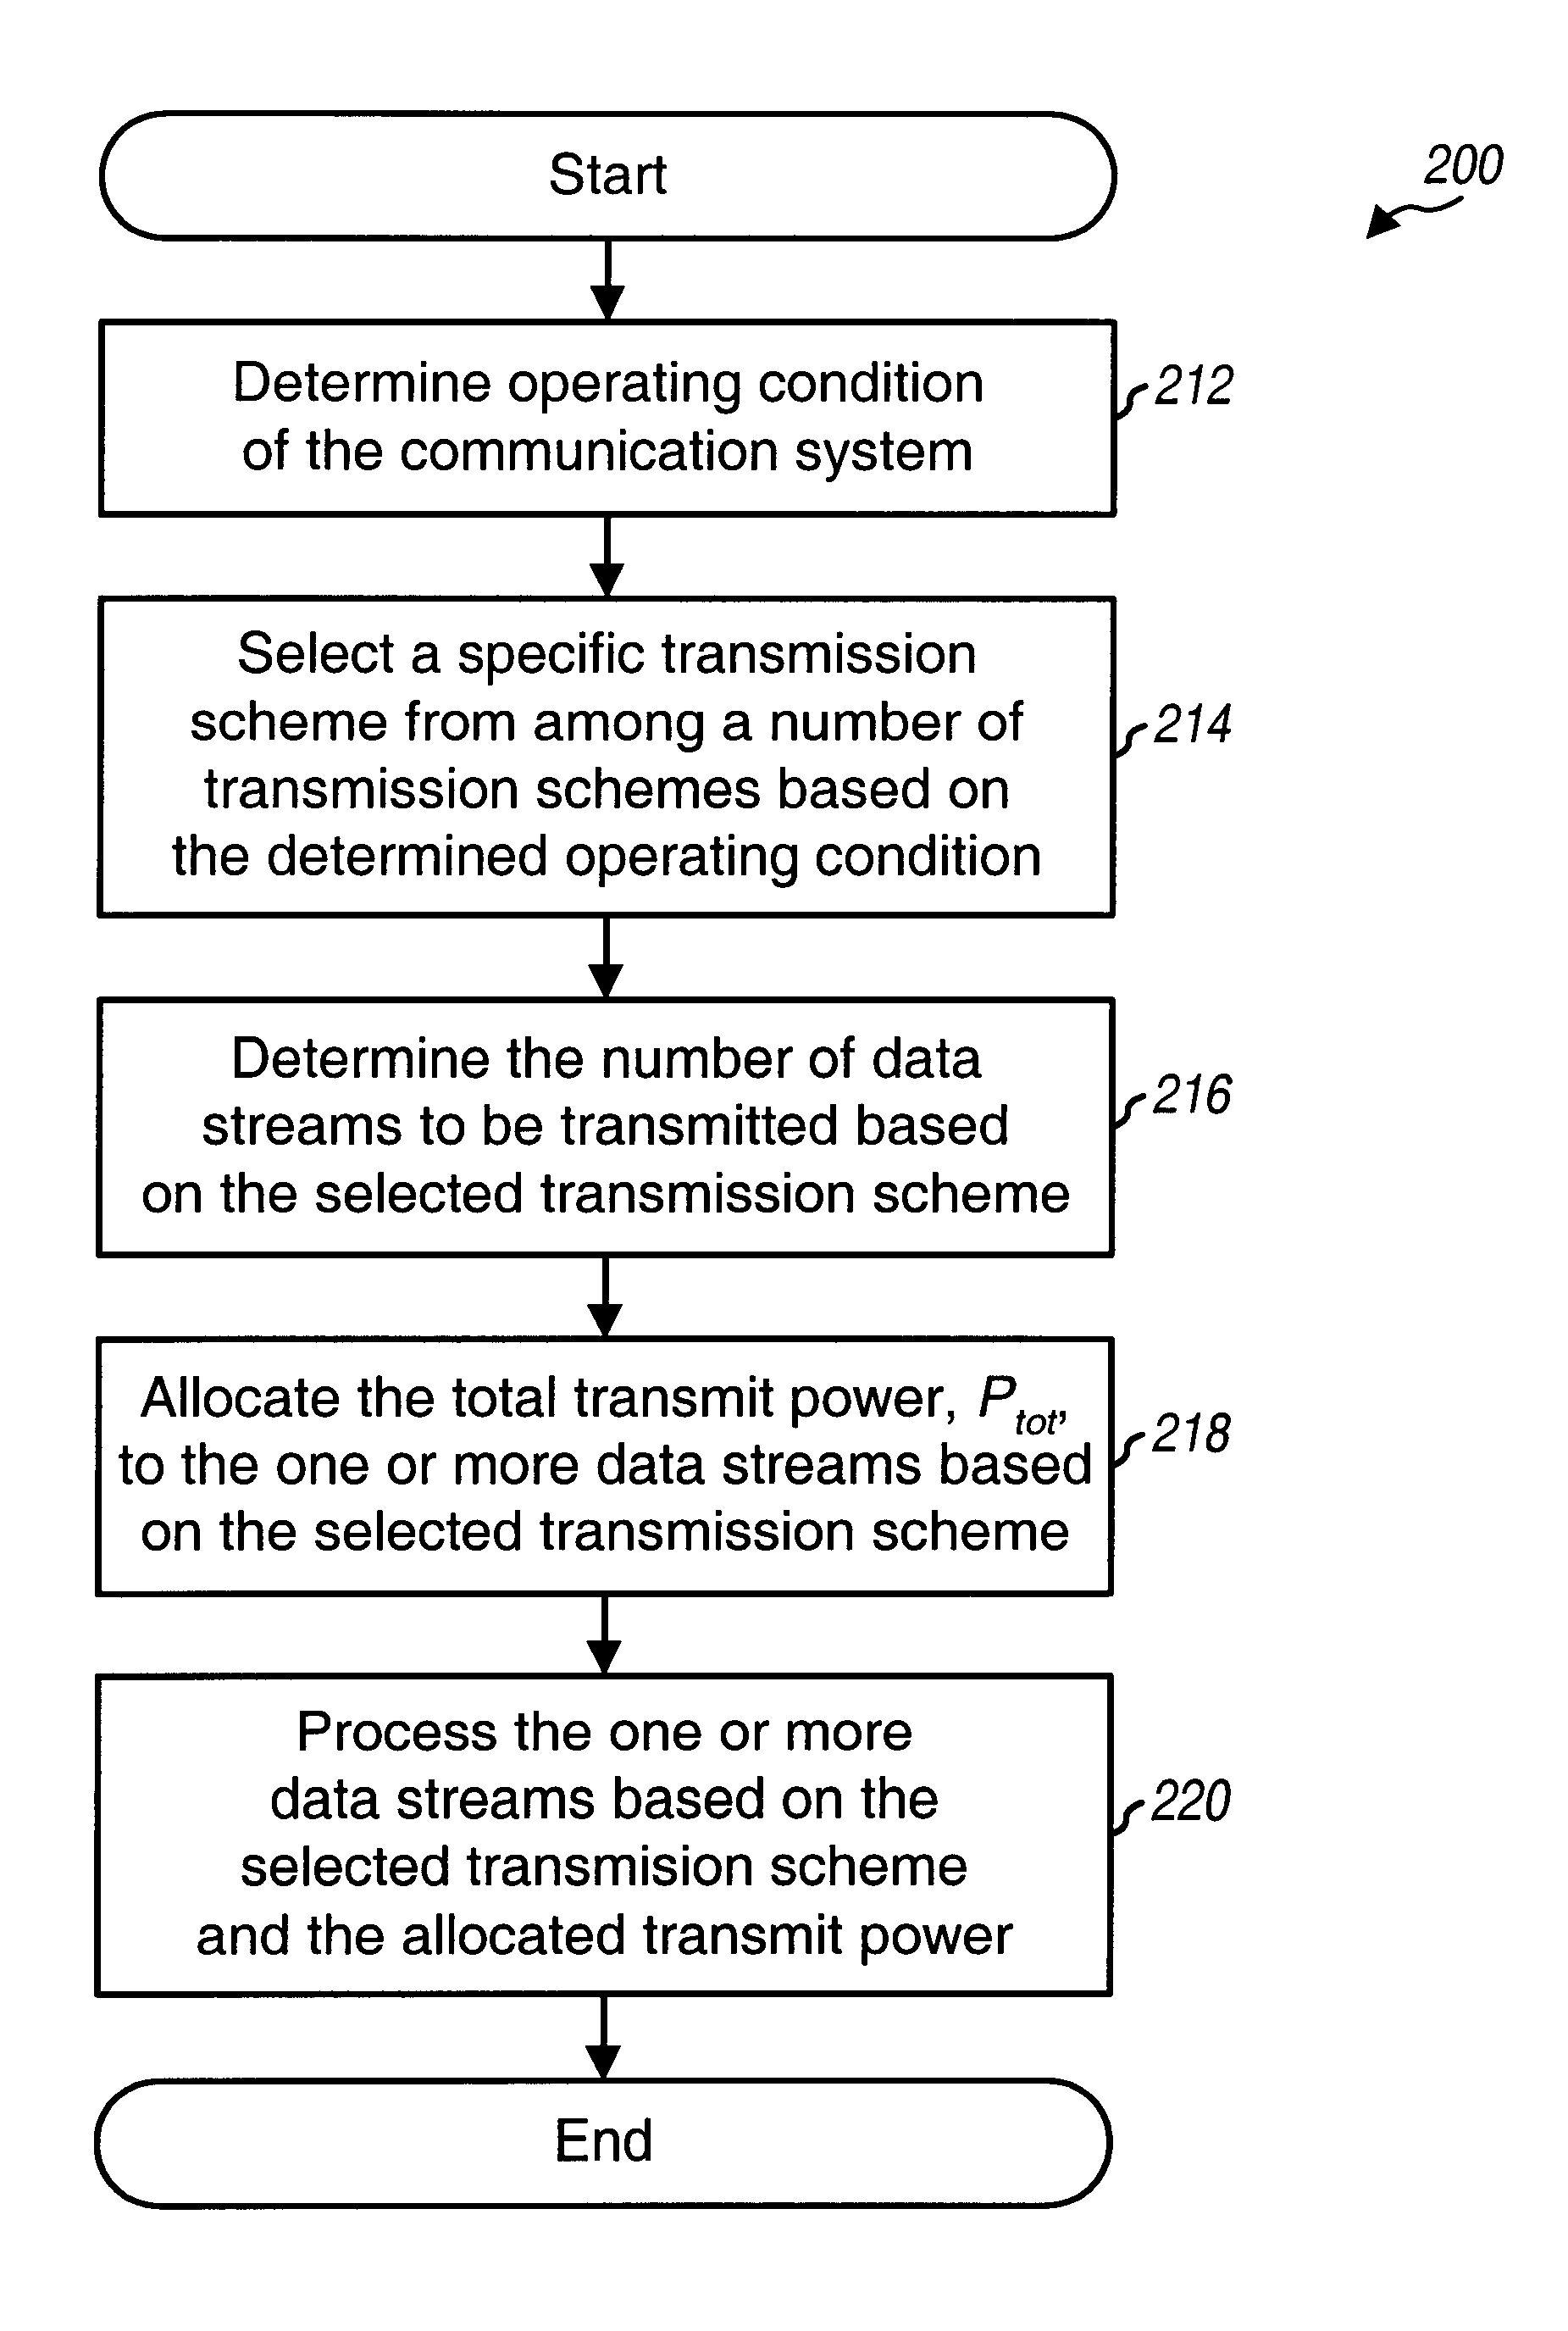 Multiple-input, multiple-output (MIMO) systems with multiple transmission modes